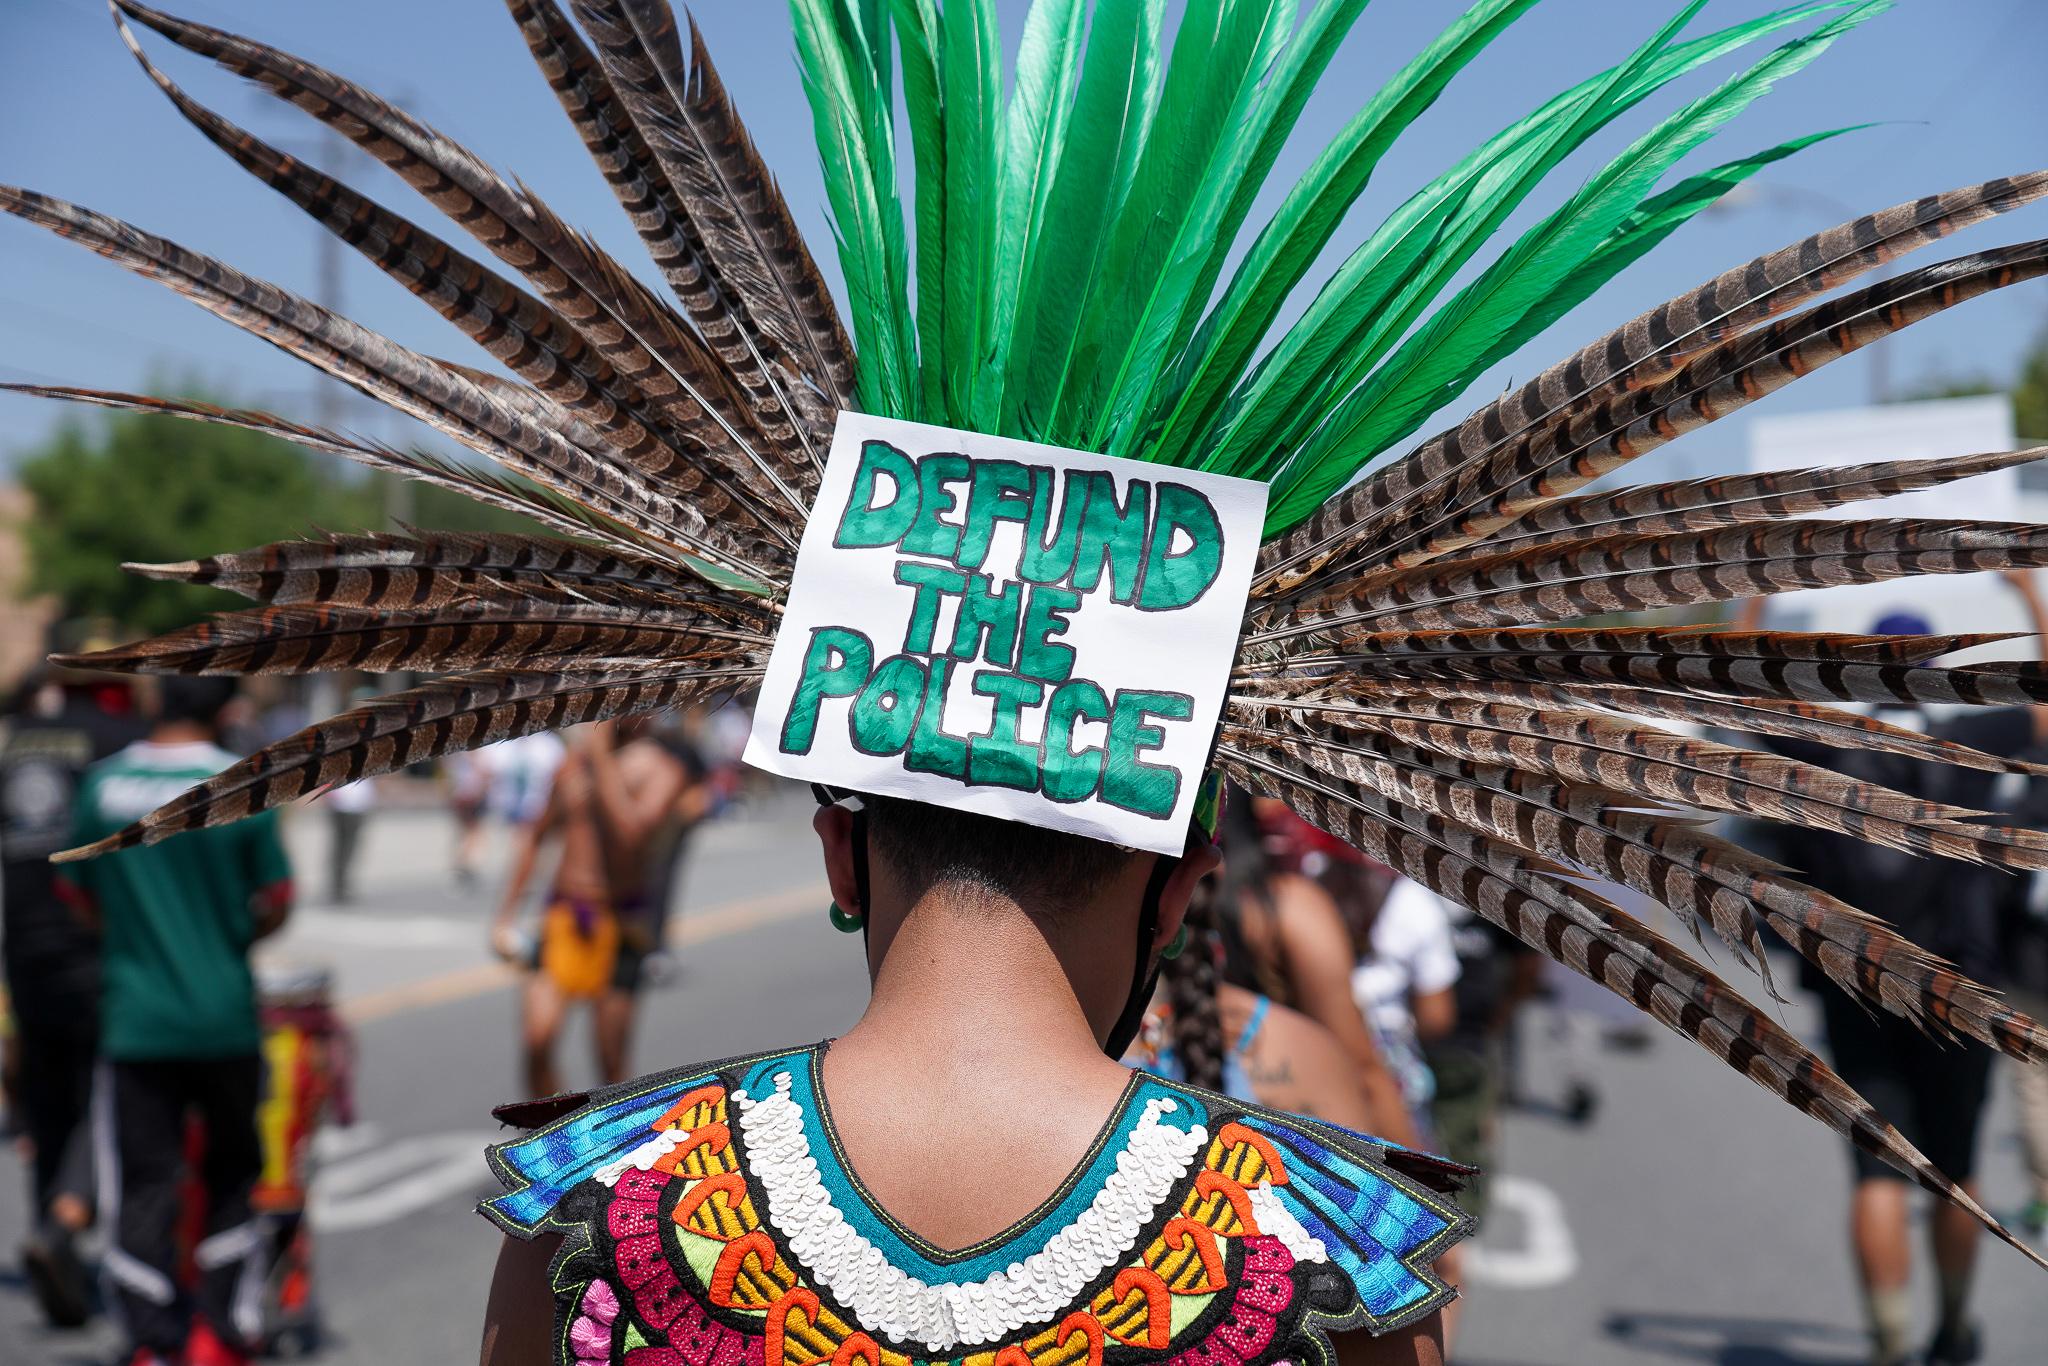 Aztec dancers joined the protest, and led the way for most of the three-and-a-half mile march. Photo: Francisco Lozano